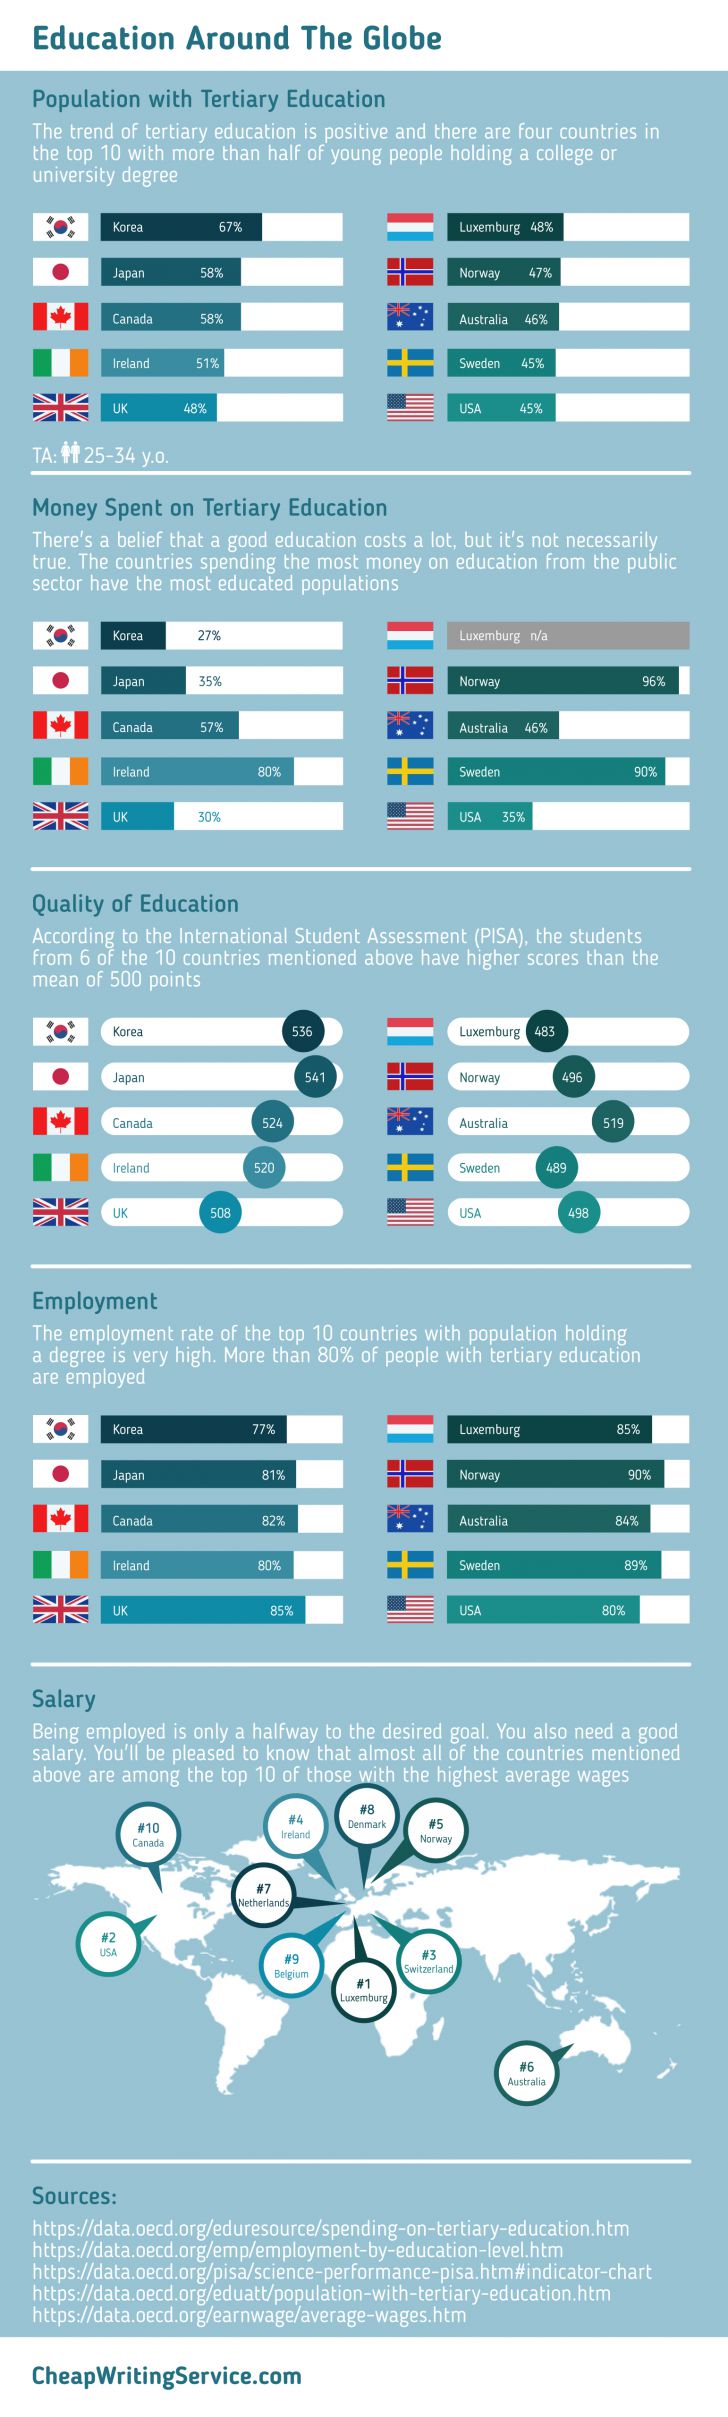 Why+Higher+Education+Is+Still+Important%3F+%5BInfographic%5D